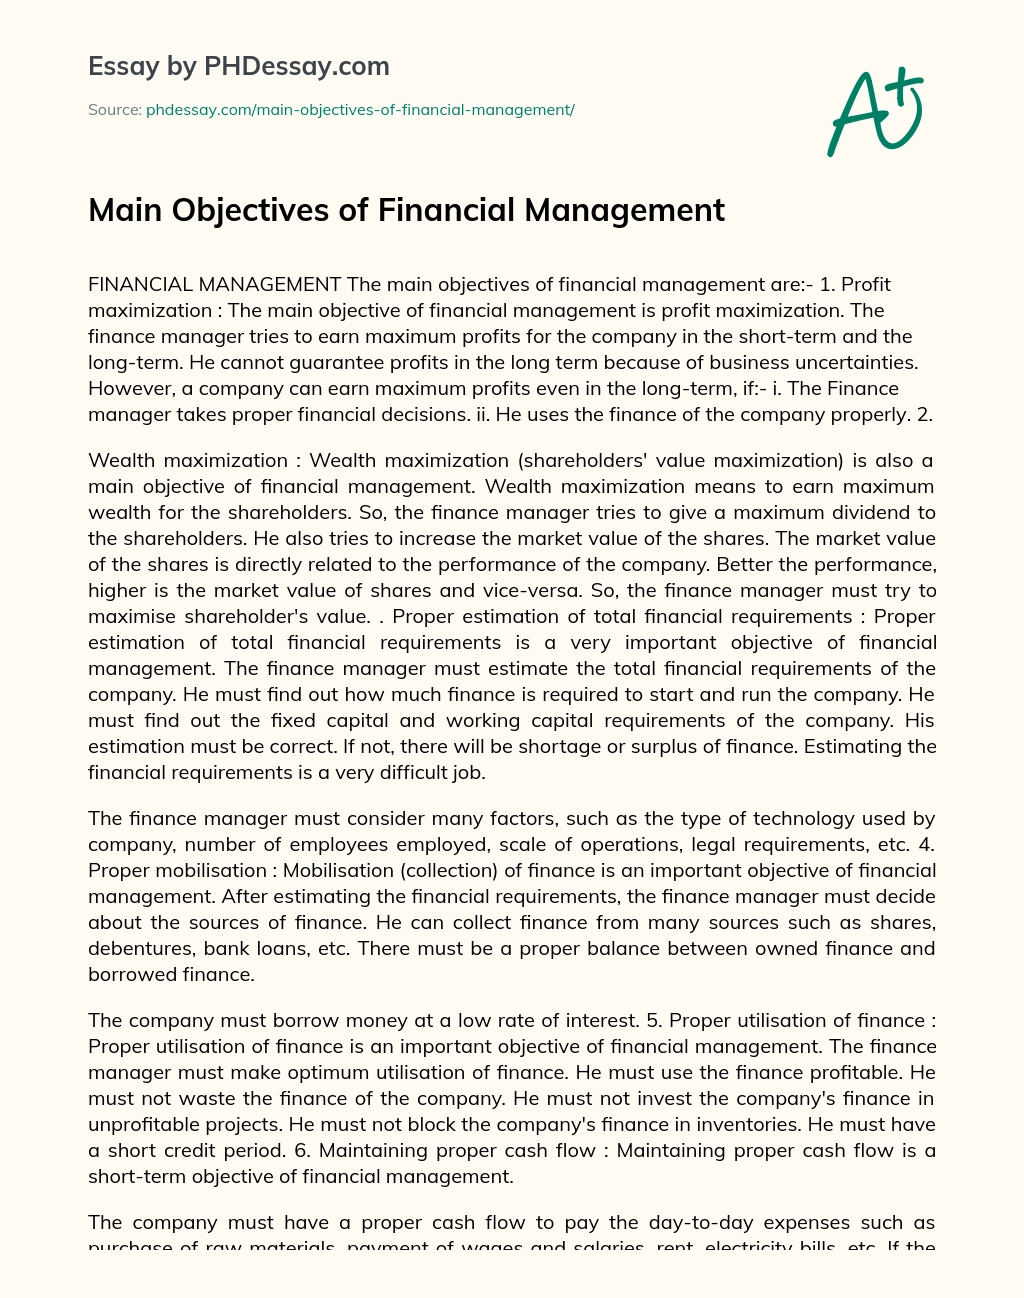 Main Objectives of Financial Management essay